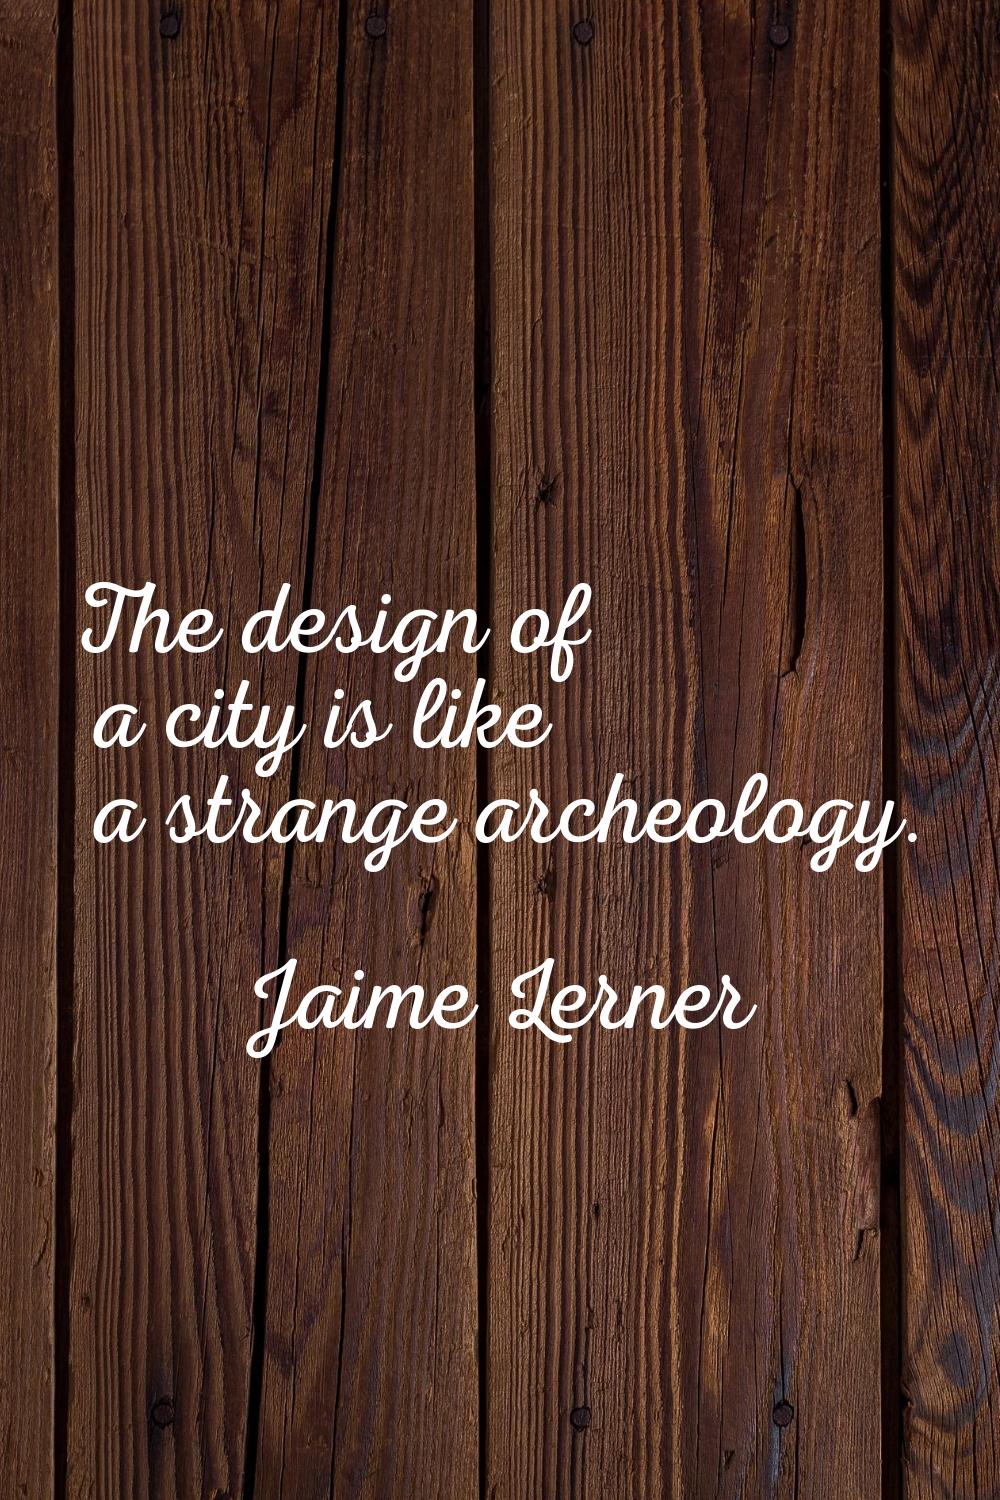 The design of a city is like a strange archeology.